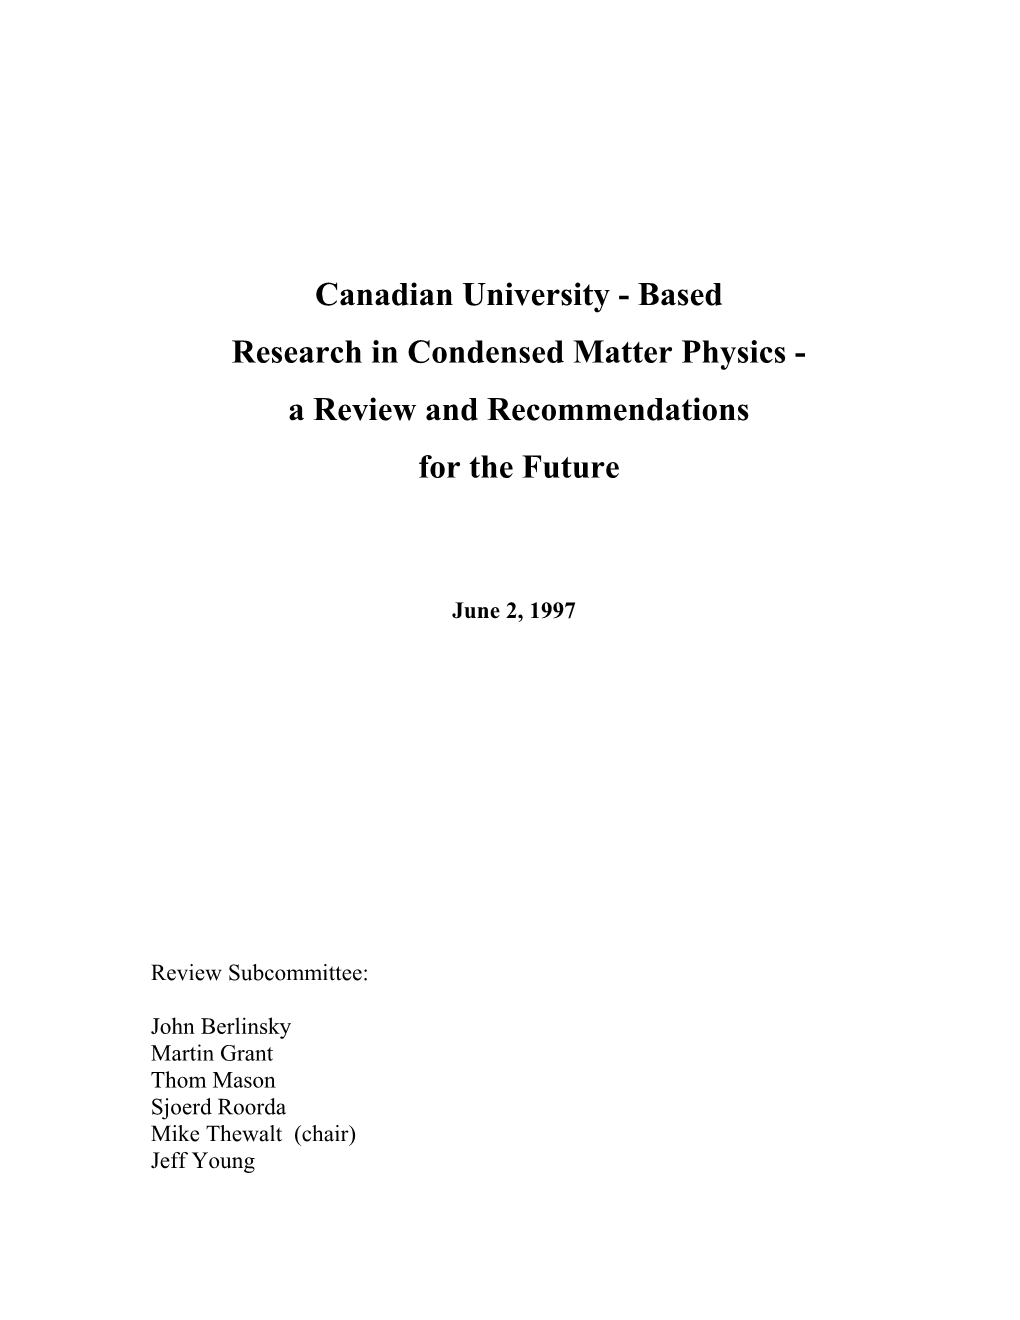 Research in Condensed Matter Physics